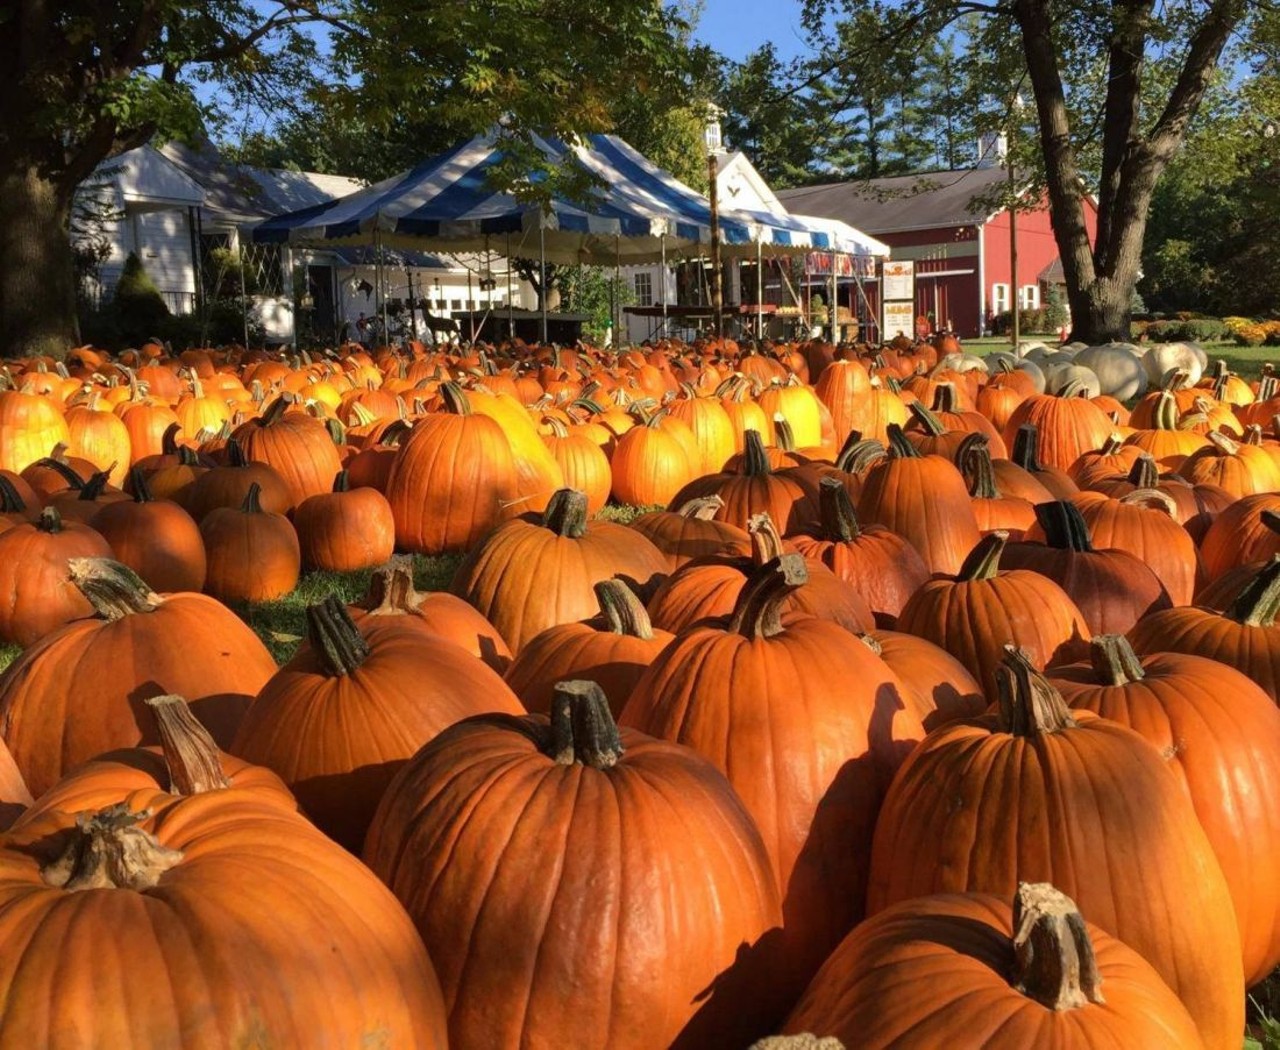  Pumpkinville
9337 Chillicothe Rd., Kirtland
Pumpkinville is open in October from 10 a.m. to 6 p.m. daily. In Kirtland, Pumpkinville has pumpkins of all sizes, mums, apples, fresh cider, corn stalks and much more.
Photo via Pumpkinville/Facebook